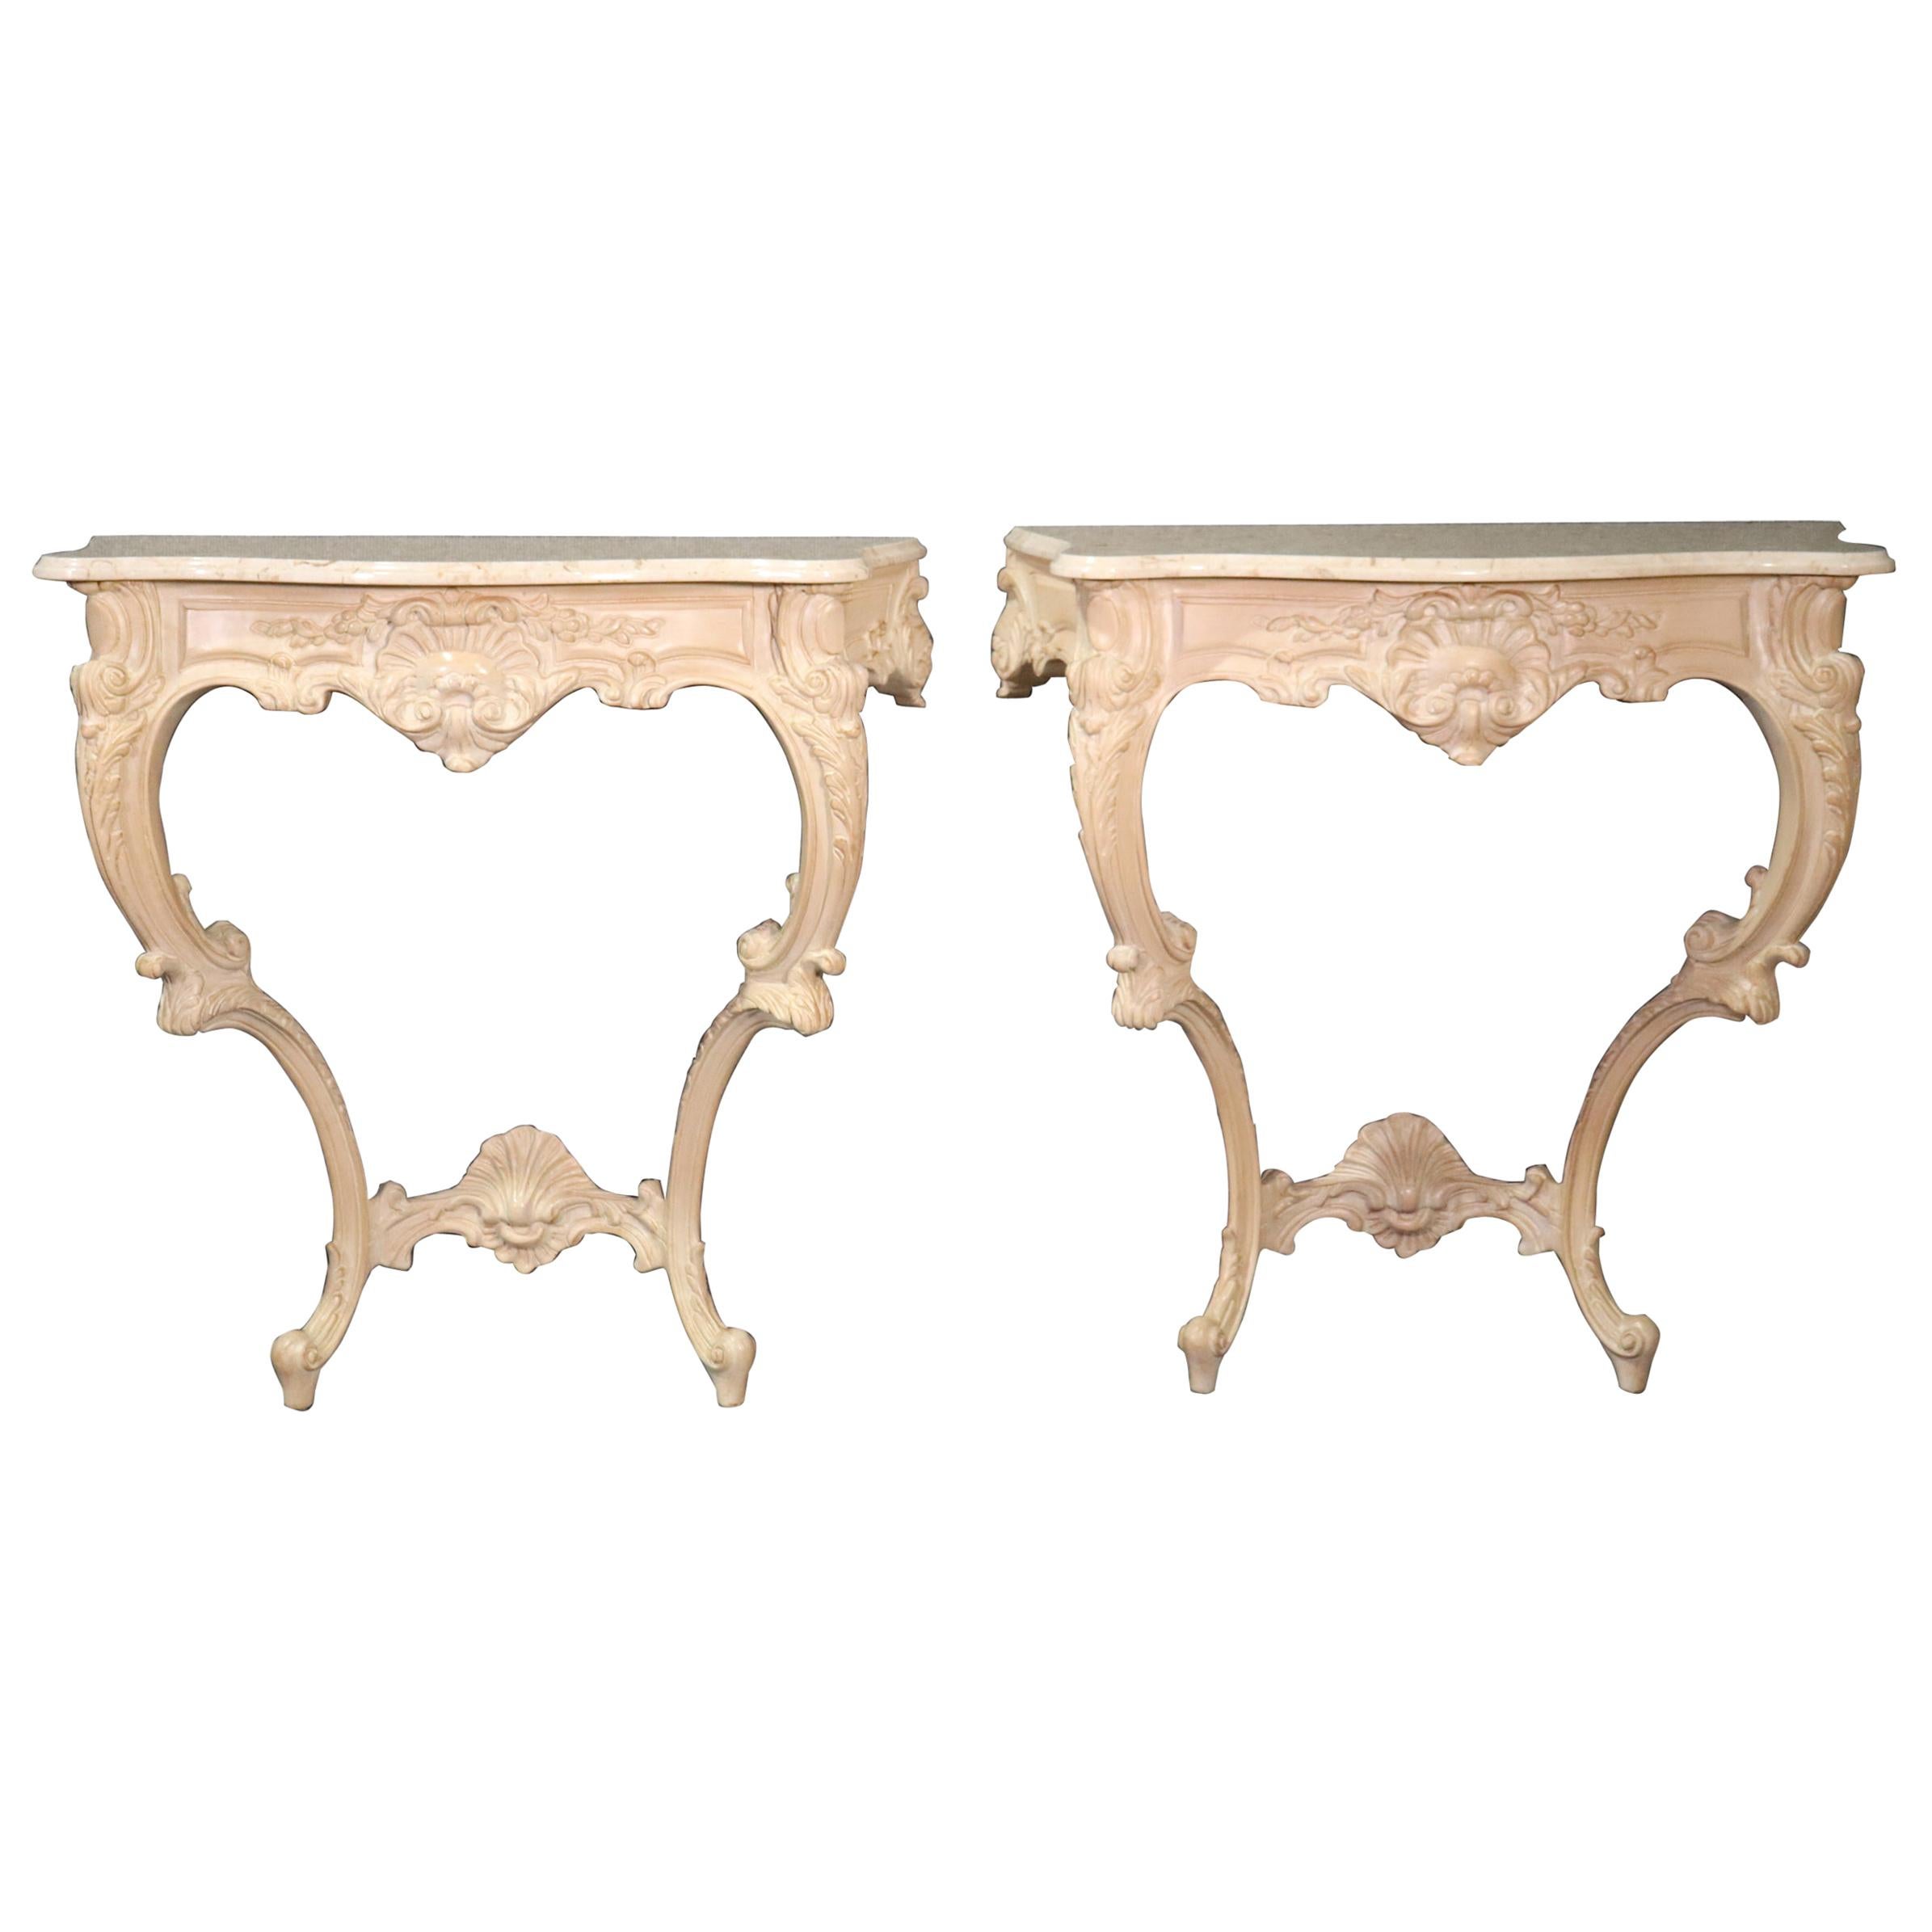 Pair of White Washed French Louis XV Marble-Top Wall Mounted Console Tables